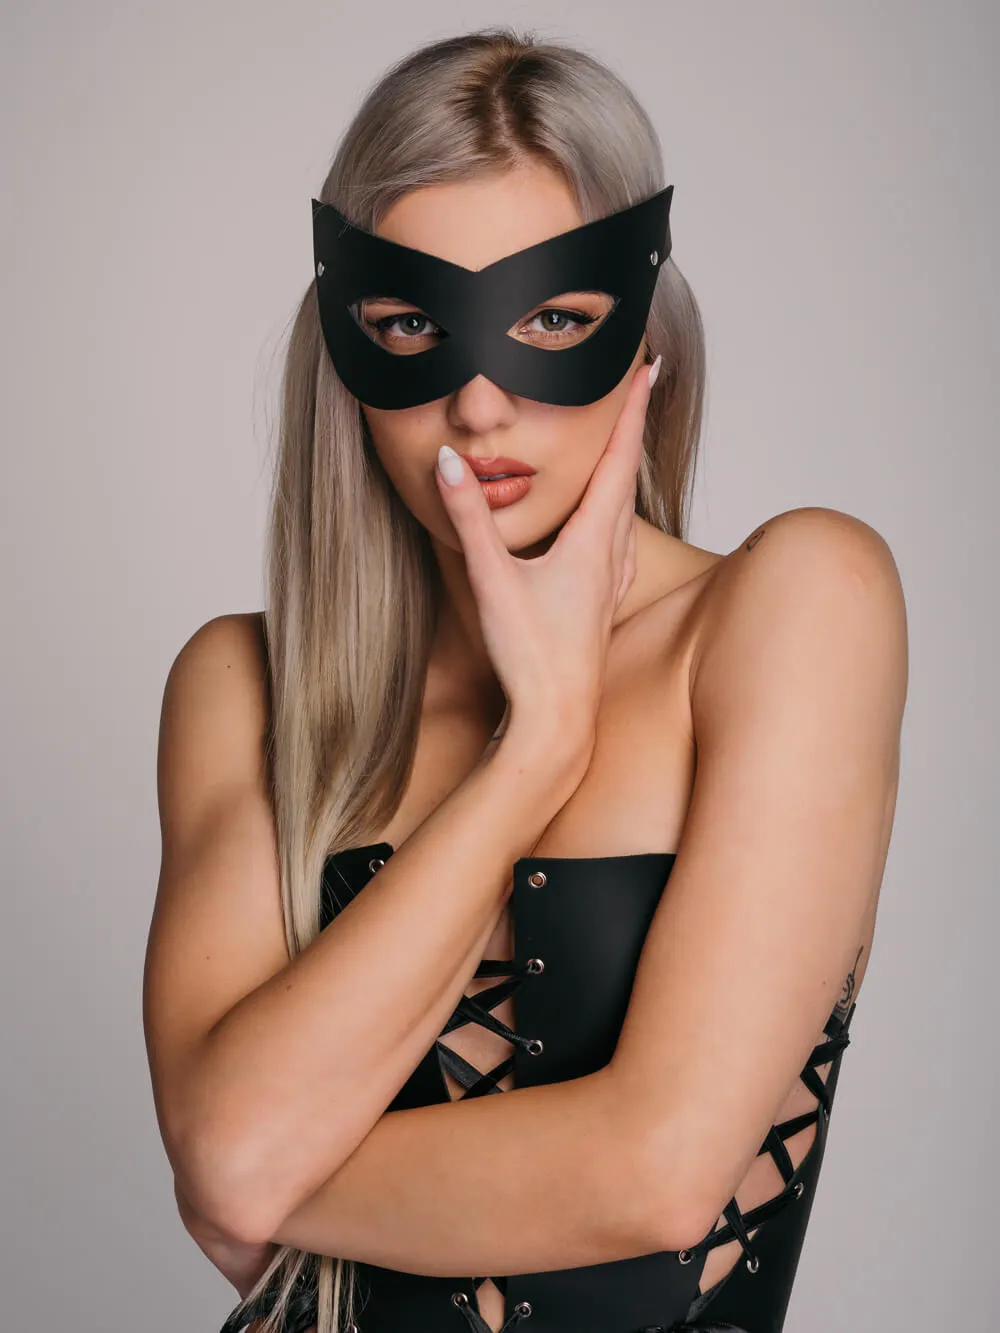 Sexy leather party eye mask. BDSM accessory and party costume.